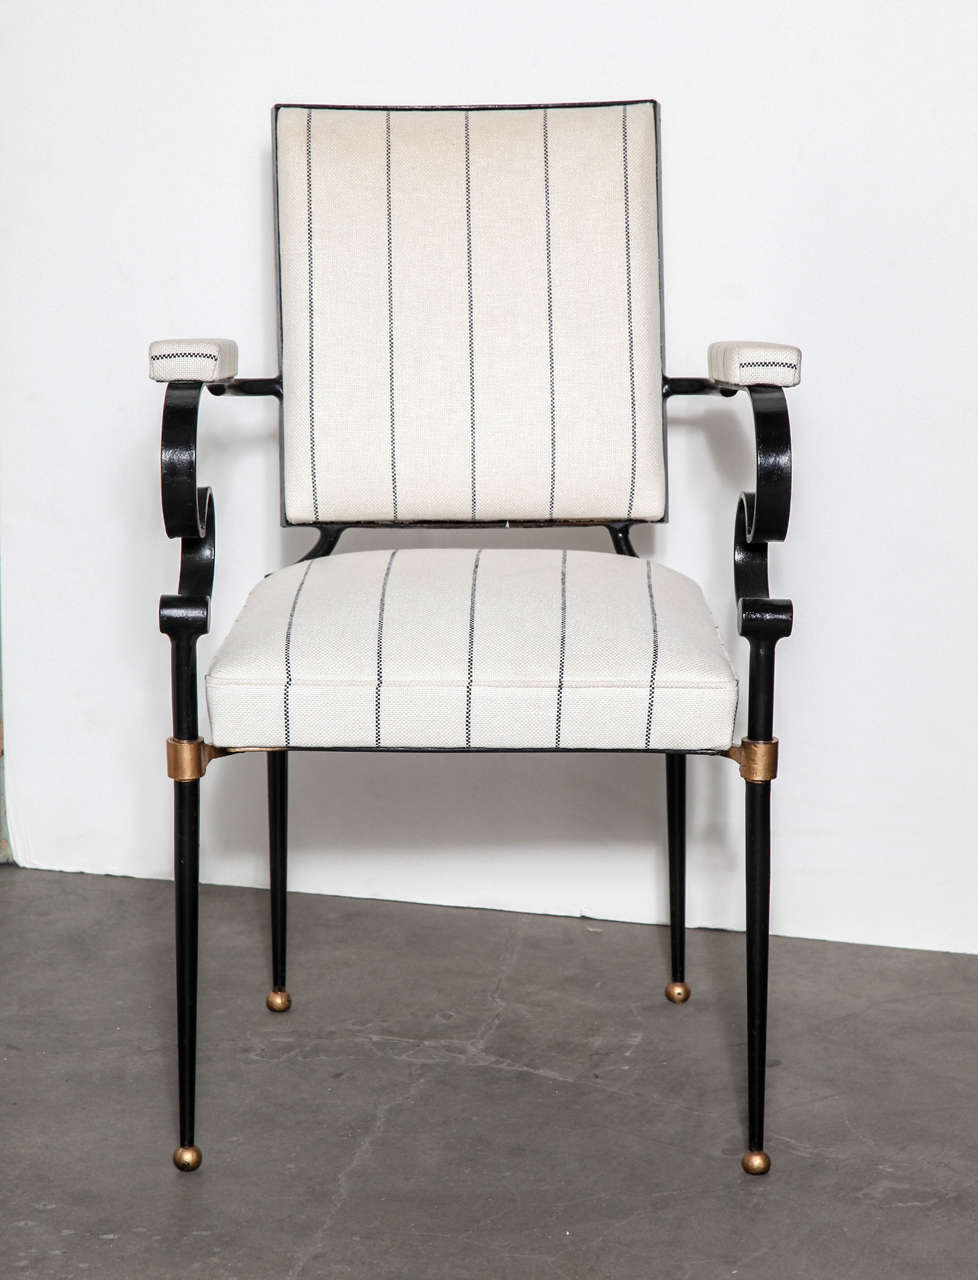 A pair of impeccable French 20th Century iron and gilt armchairs in the manner of Gilbert Poillerat. Upholstered in black and white striped linen by Holland & Sherry.